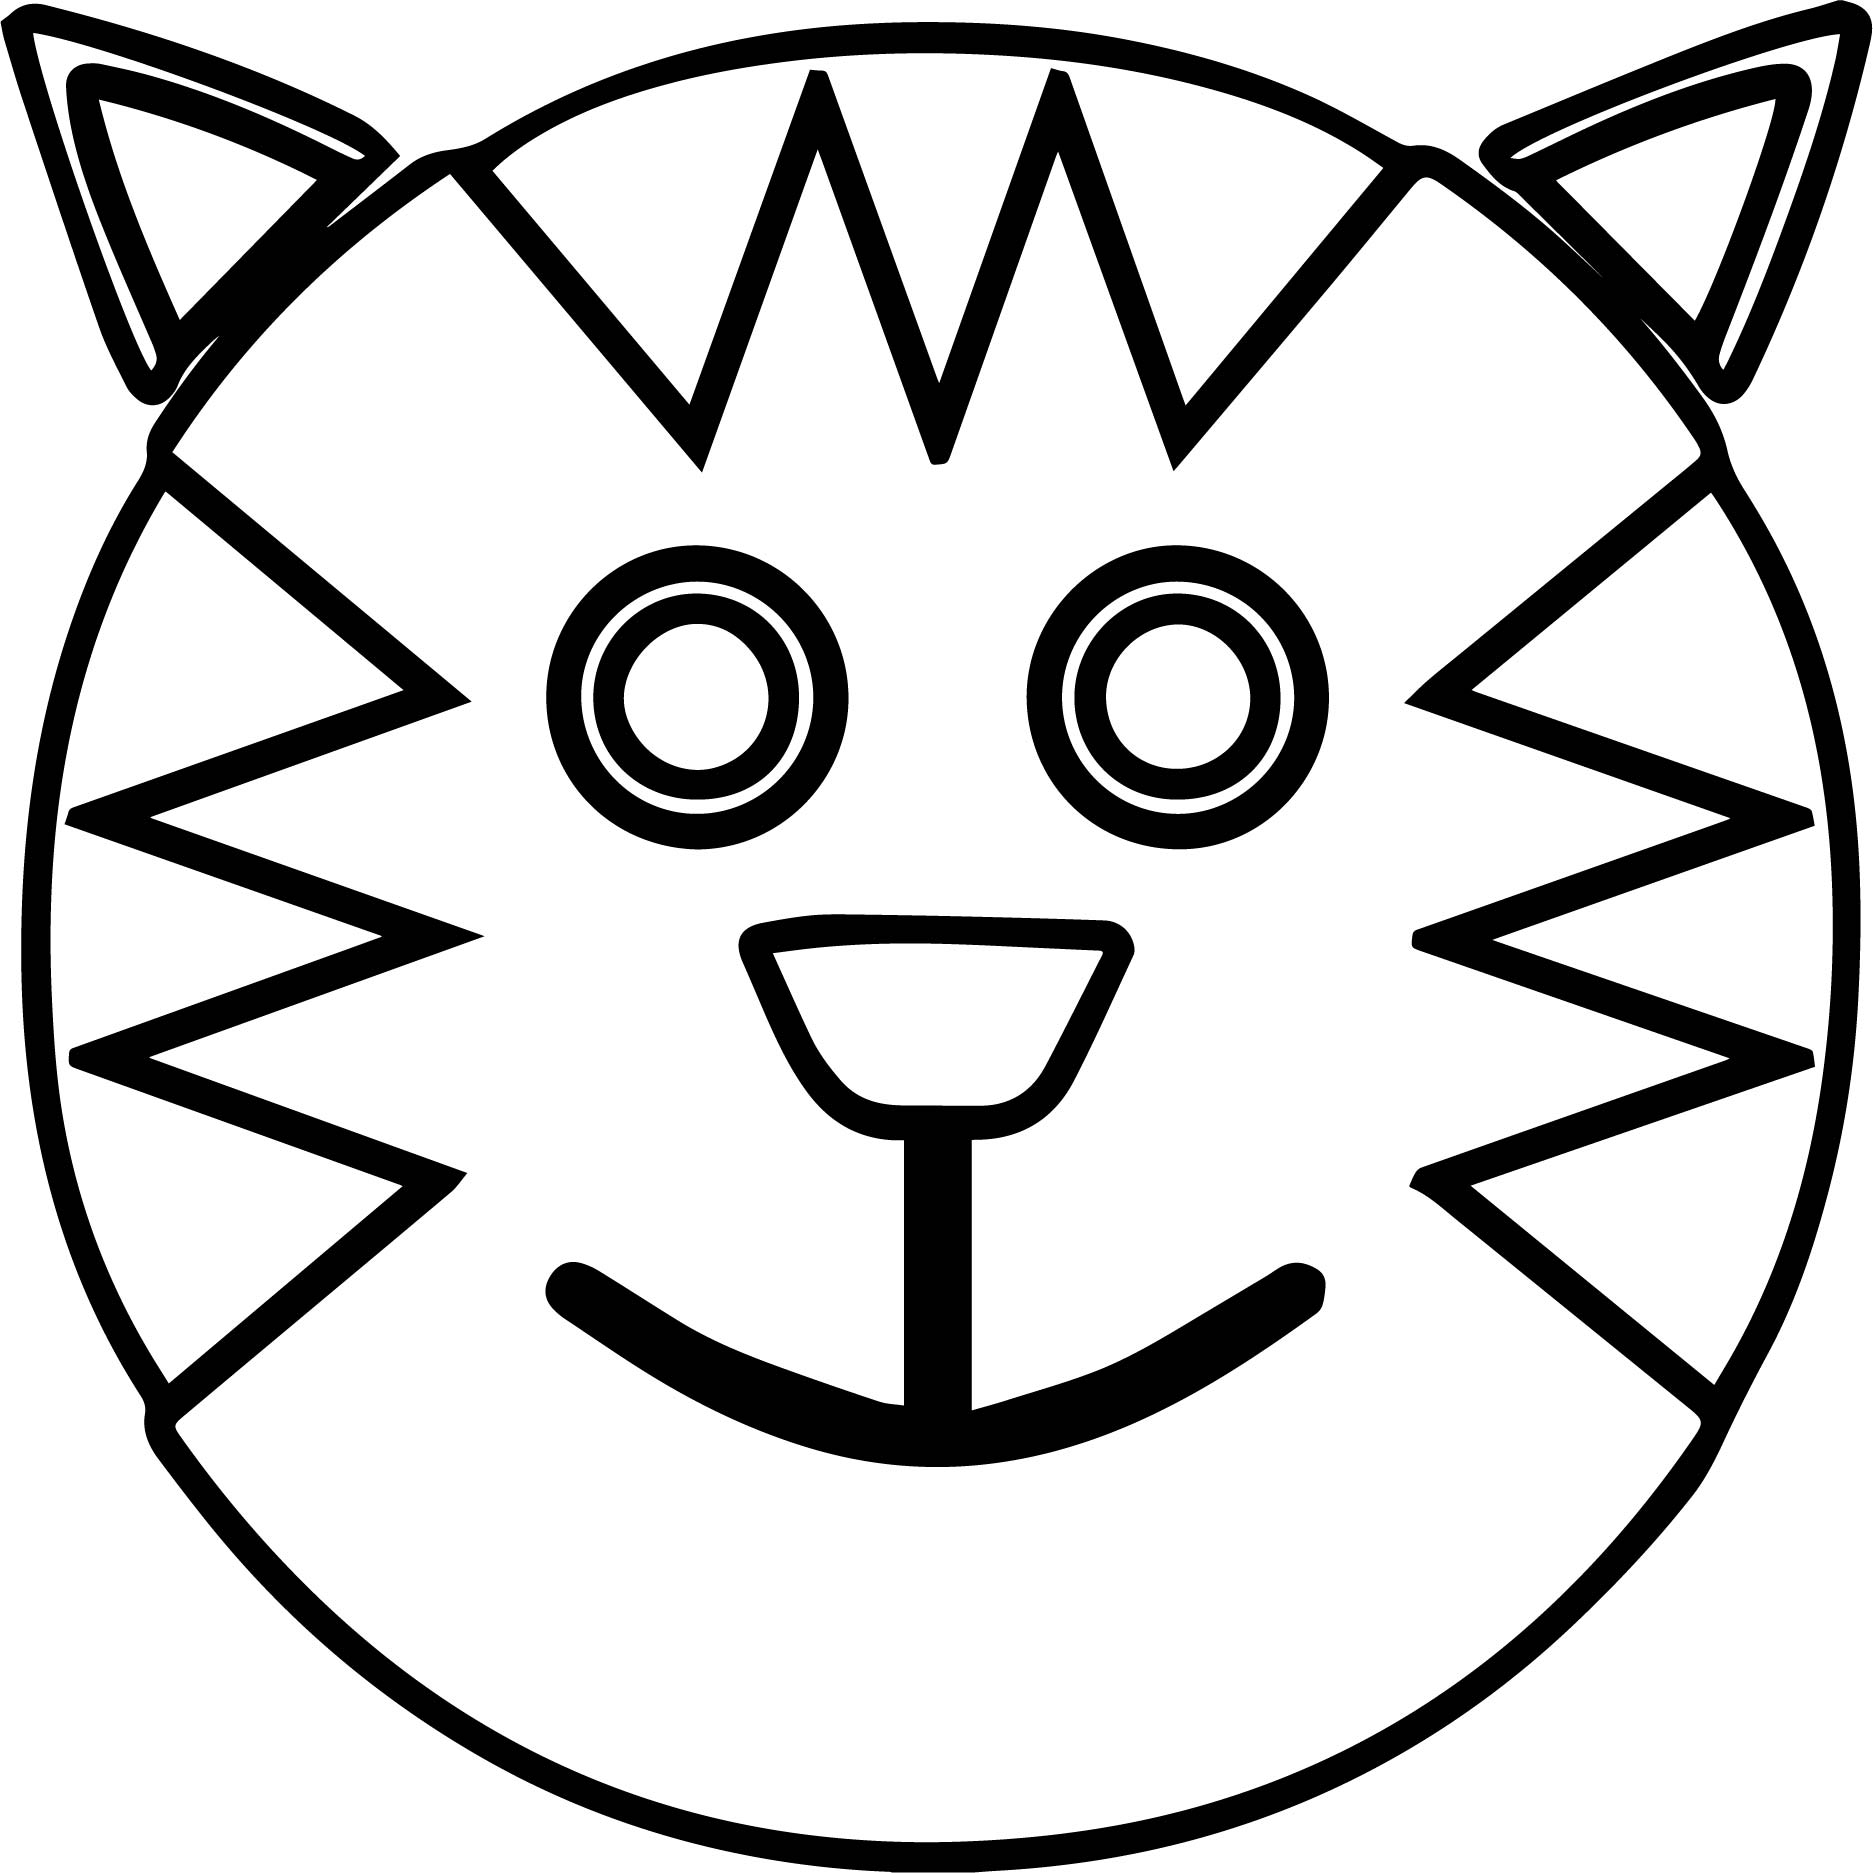 Smiling Face Coloring Page at GetColorings.com | Free printable ...